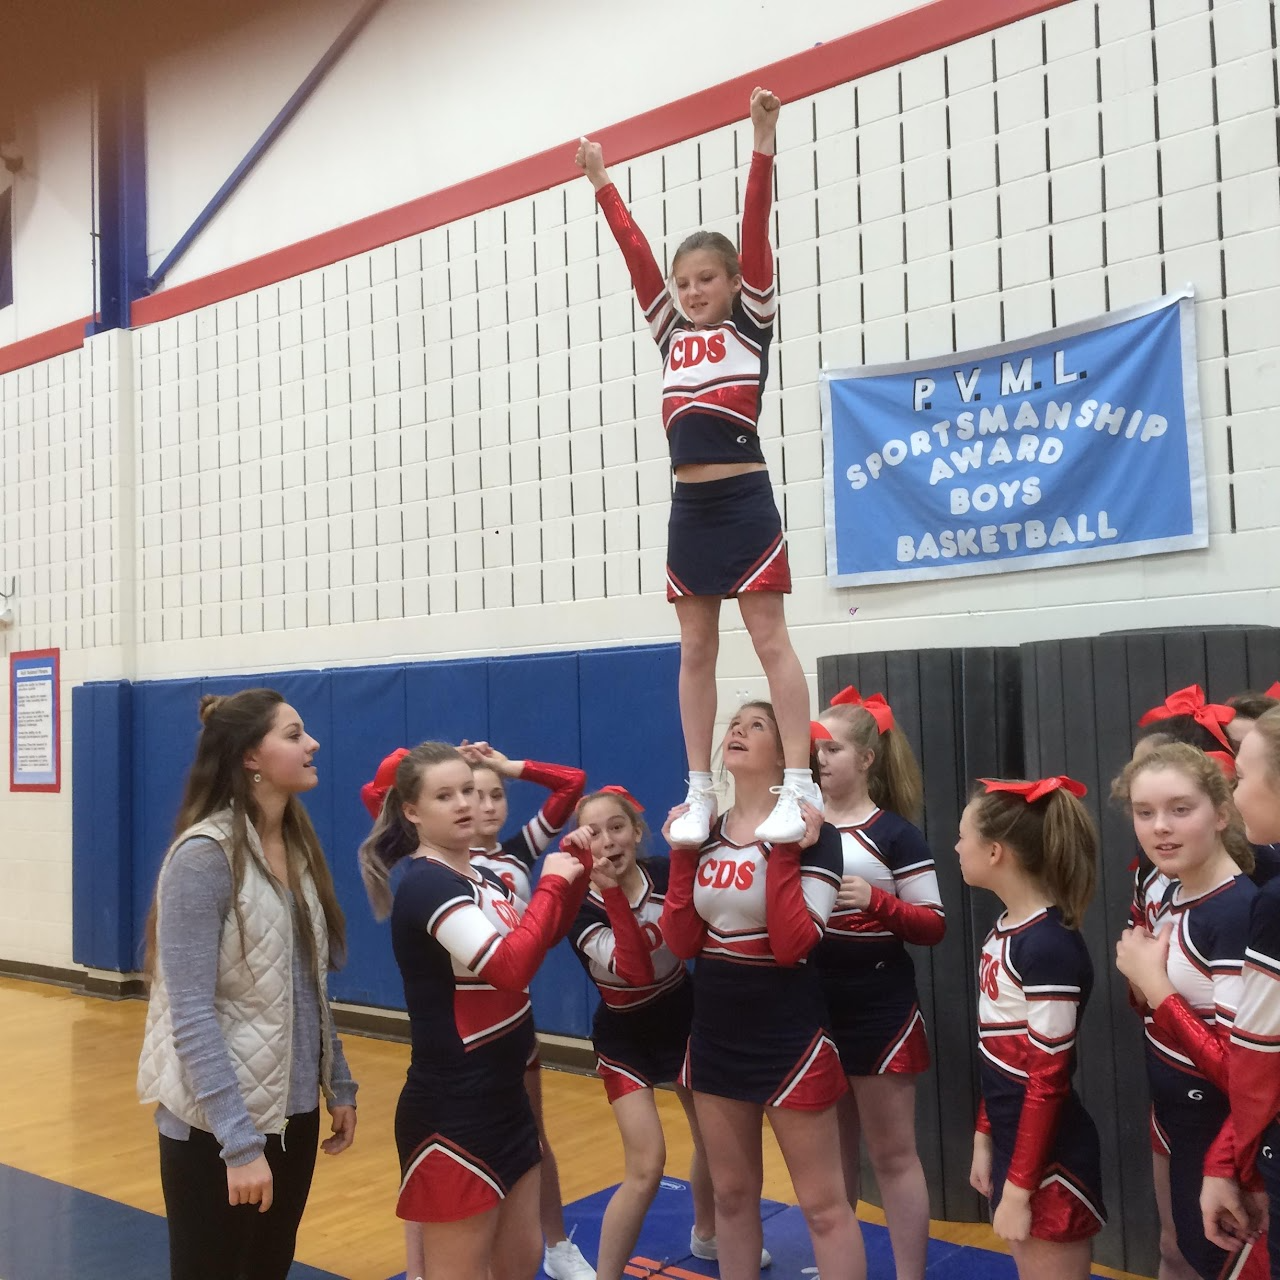 Cheerleading team doing stunts with coach on the side